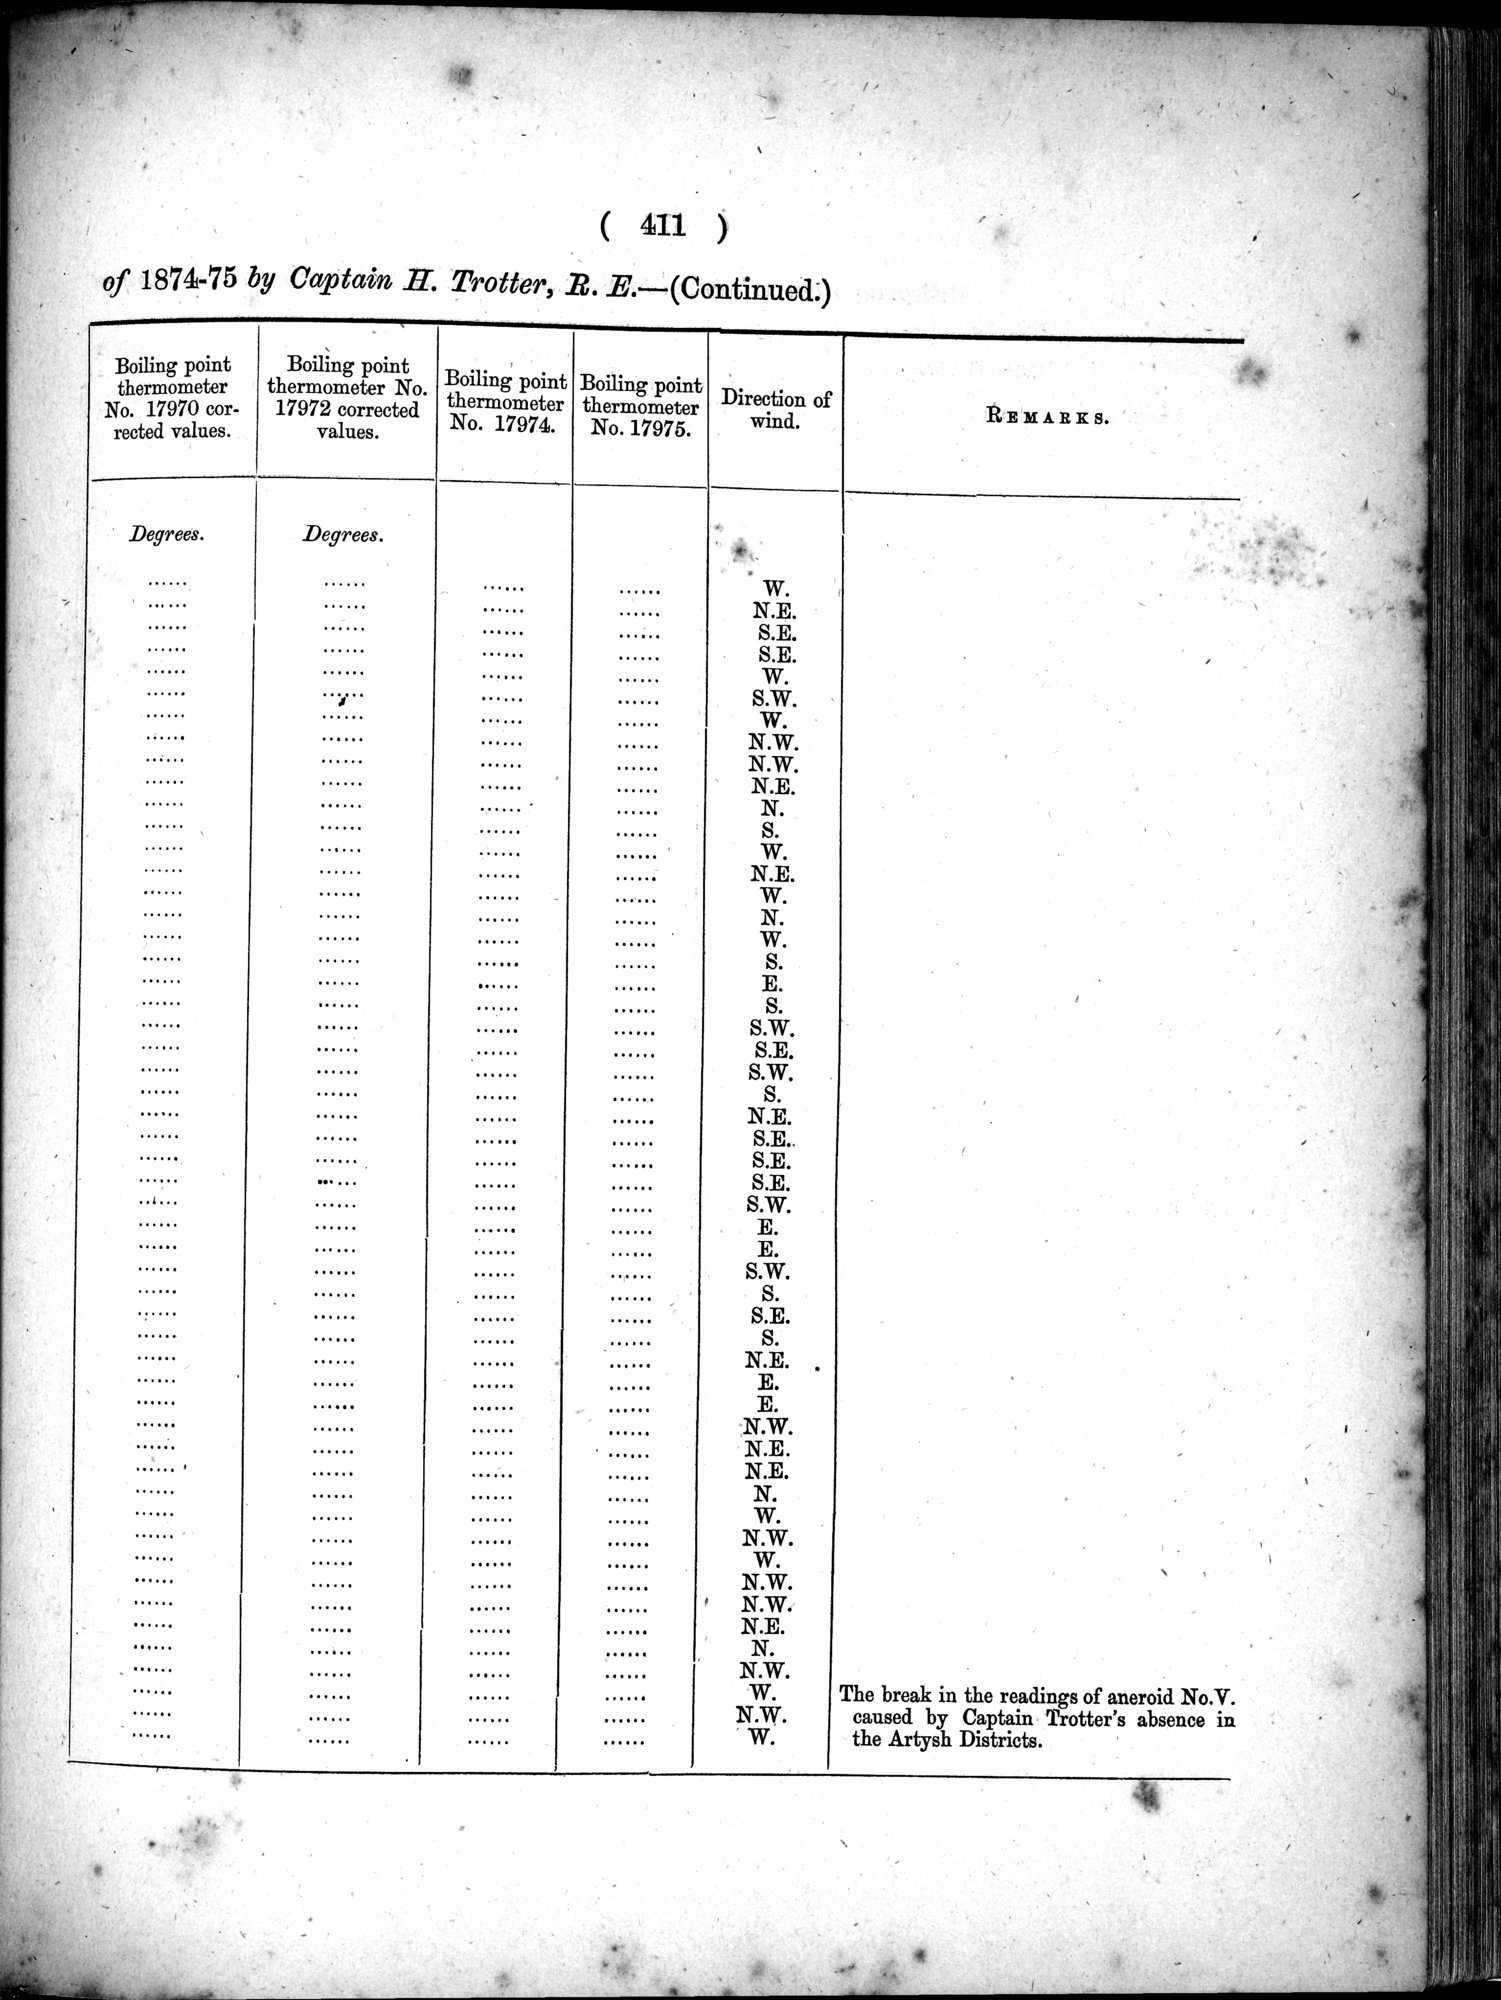 Report of a Mission to Yarkund in 1873 : vol.1 / Page 545 (Grayscale High Resolution Image)